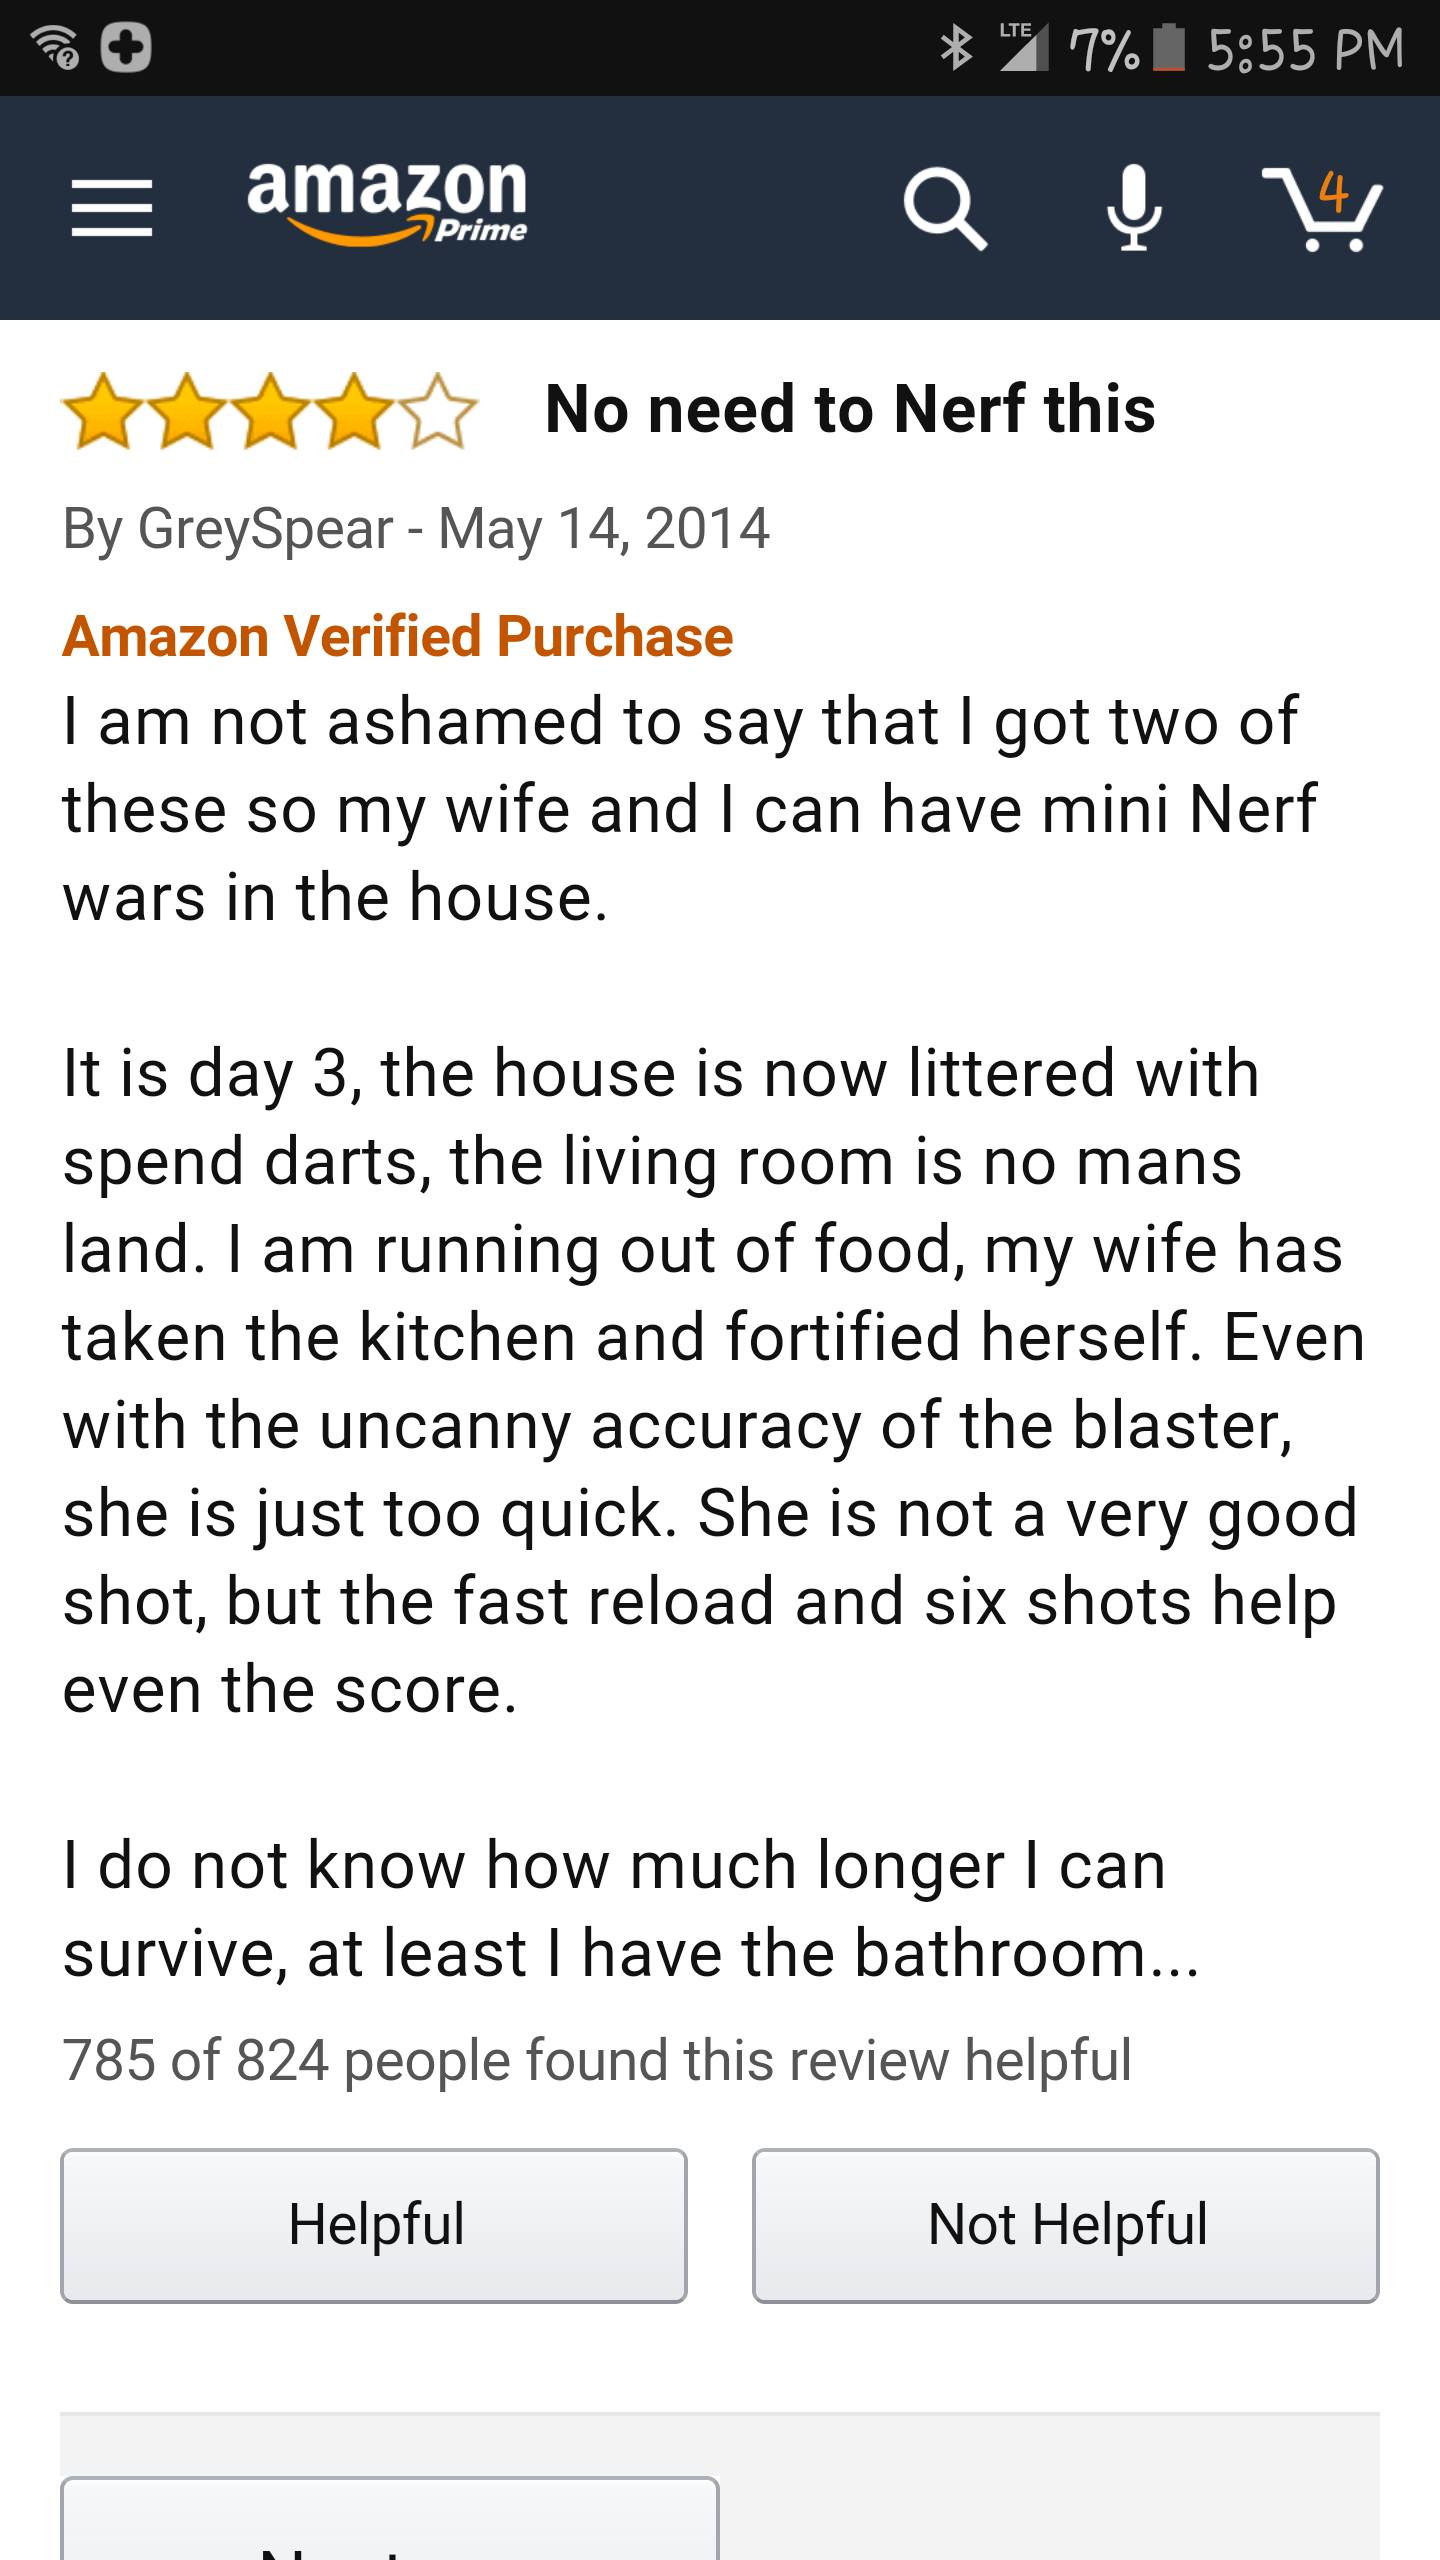 This guy knows how to Nerf.